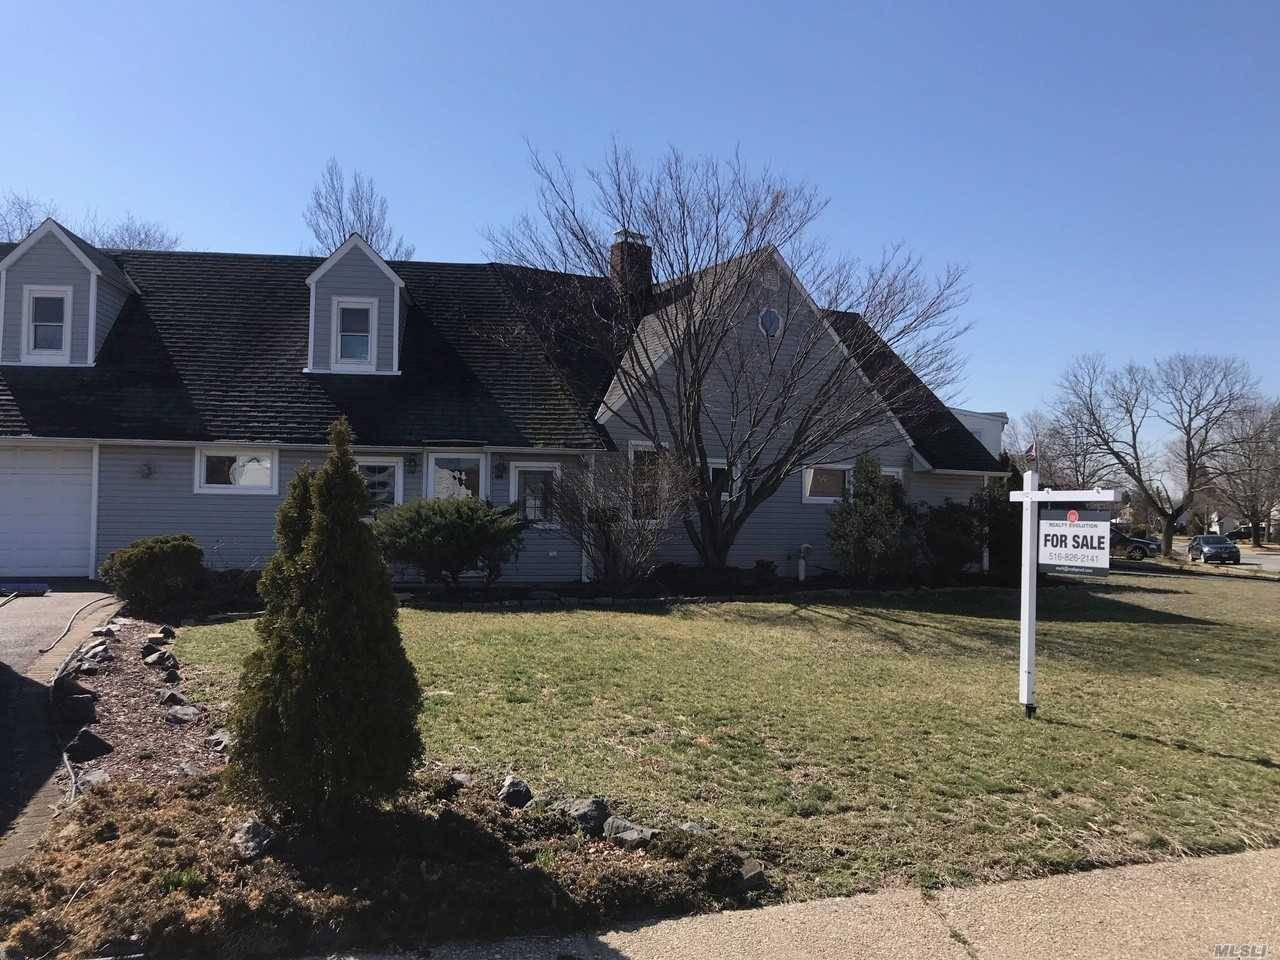 Just reduced, Expanded Cape, Over 2000SF, Features Spacious Open Floor Plan with Newly Remodeled EIK, Den, Living Room, 3 Bedrooms and 2 New Full Bathrooms.